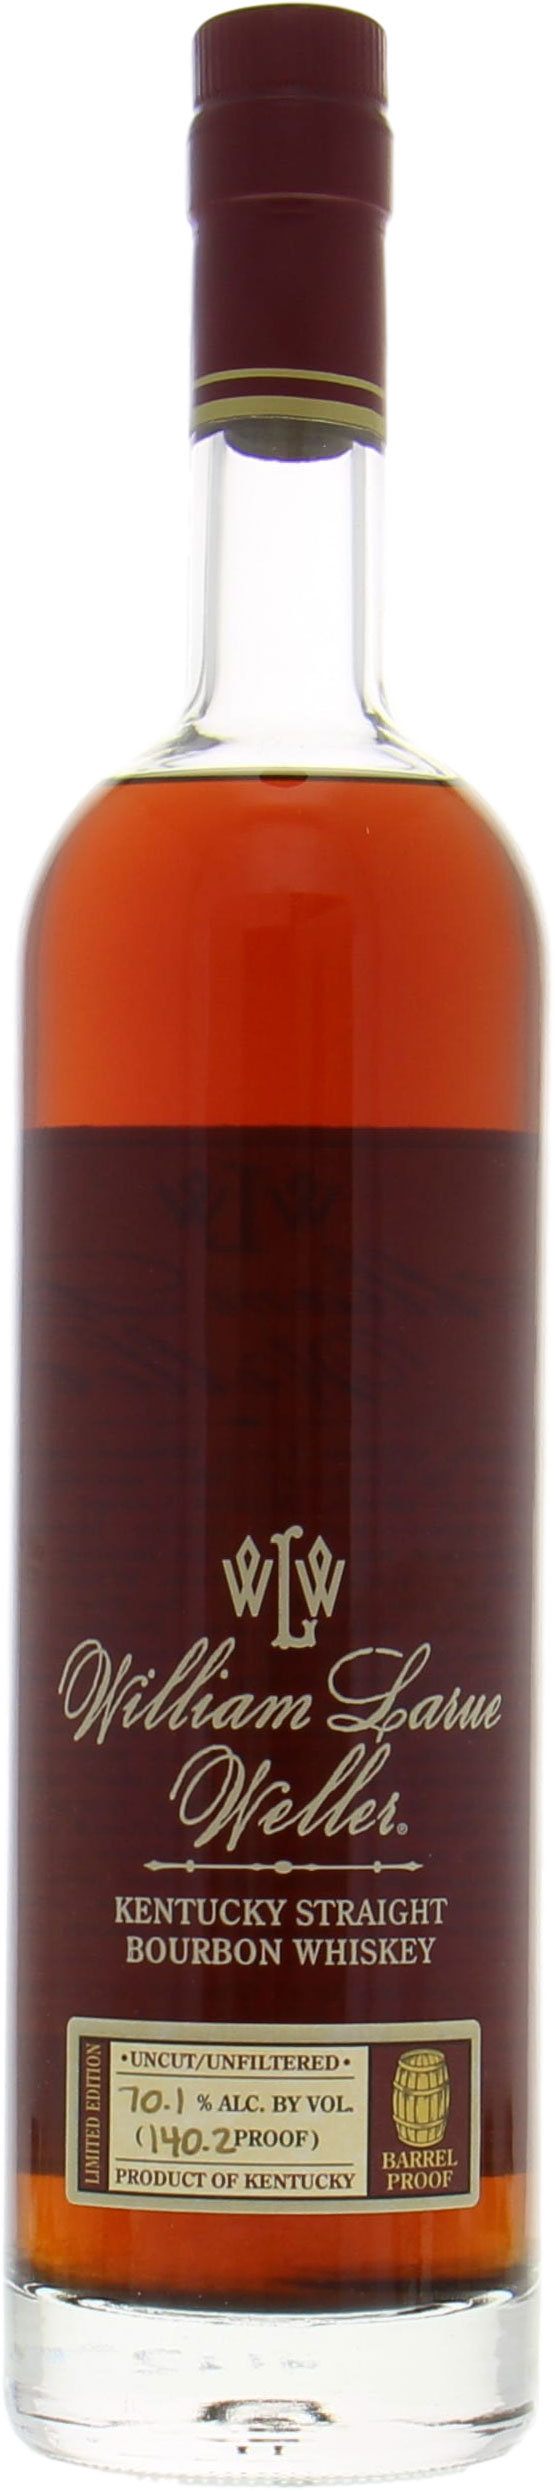 Buffalo Trace - William Larue Weller 12 Years Old Limited Edition 140.2 Proof 70.1% 2002 Perfect